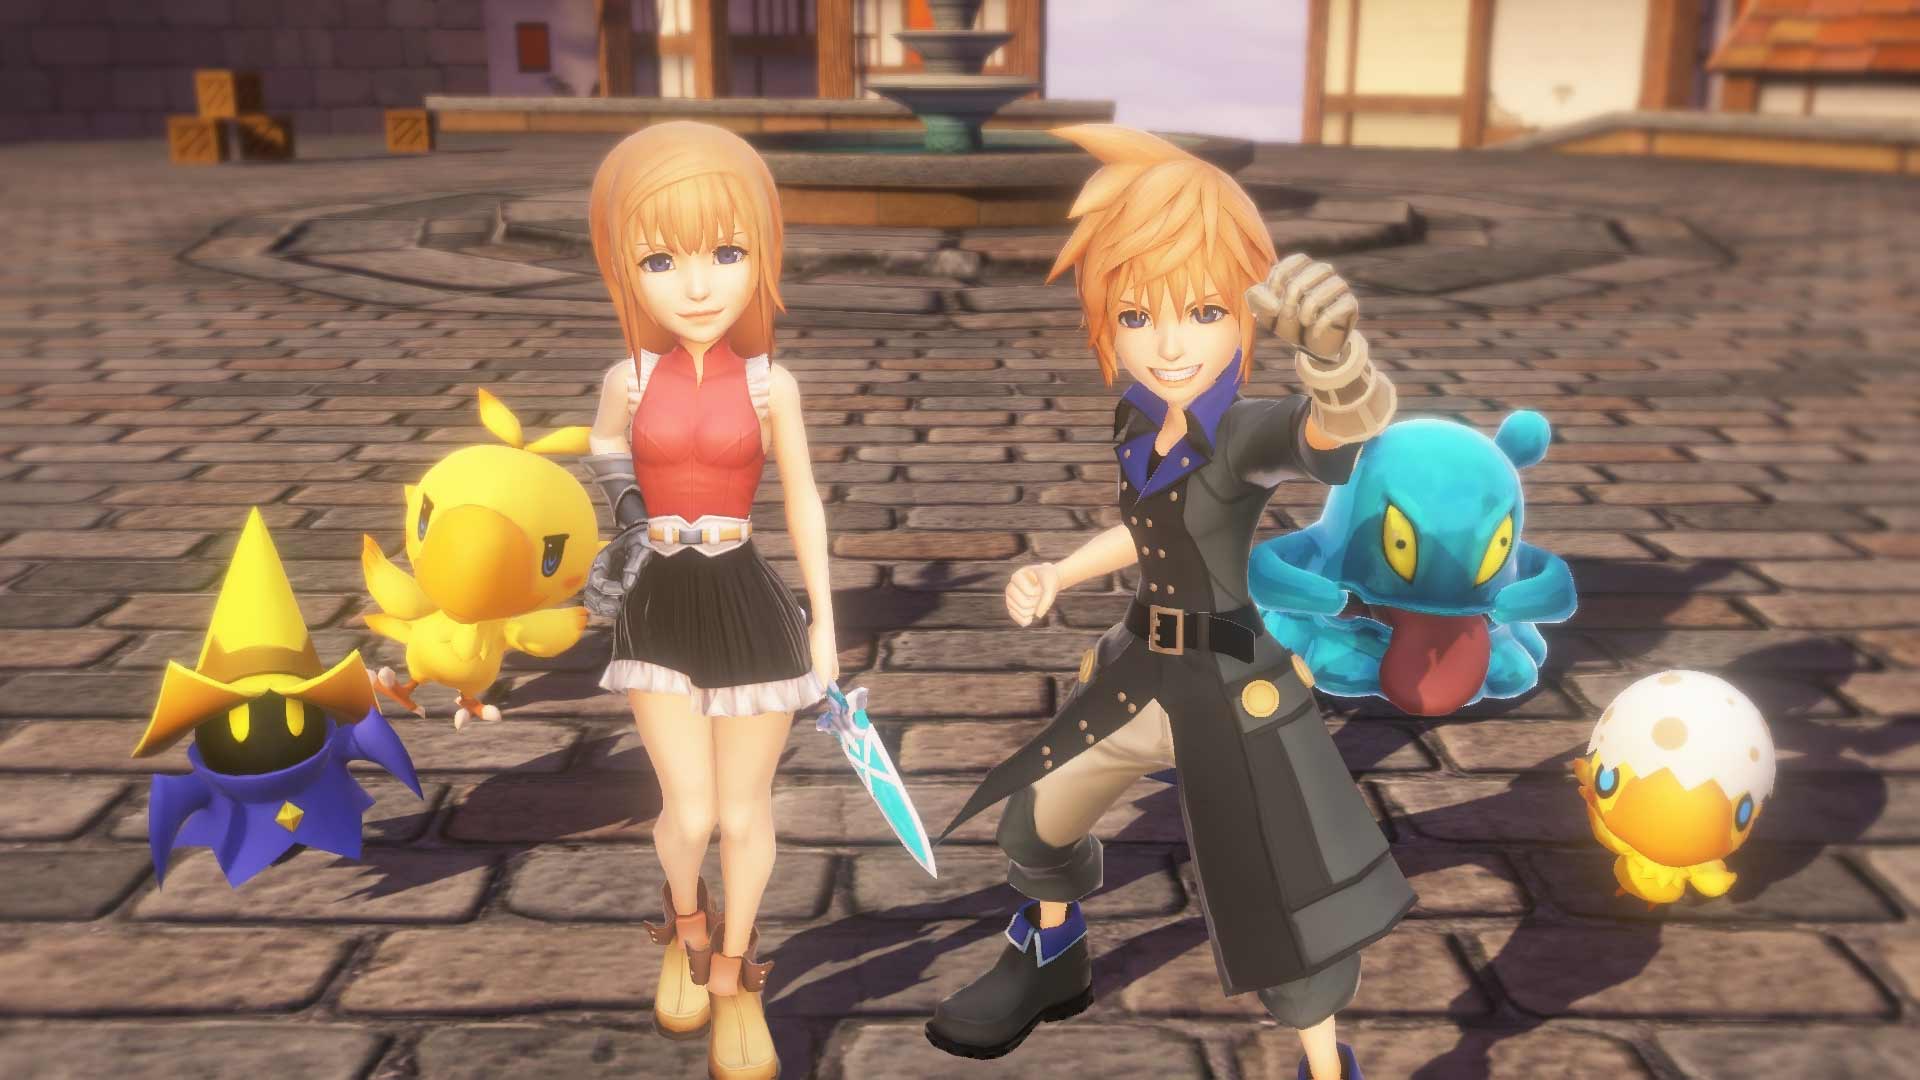 World of Final Fantasy is now available on Steam, here are the new